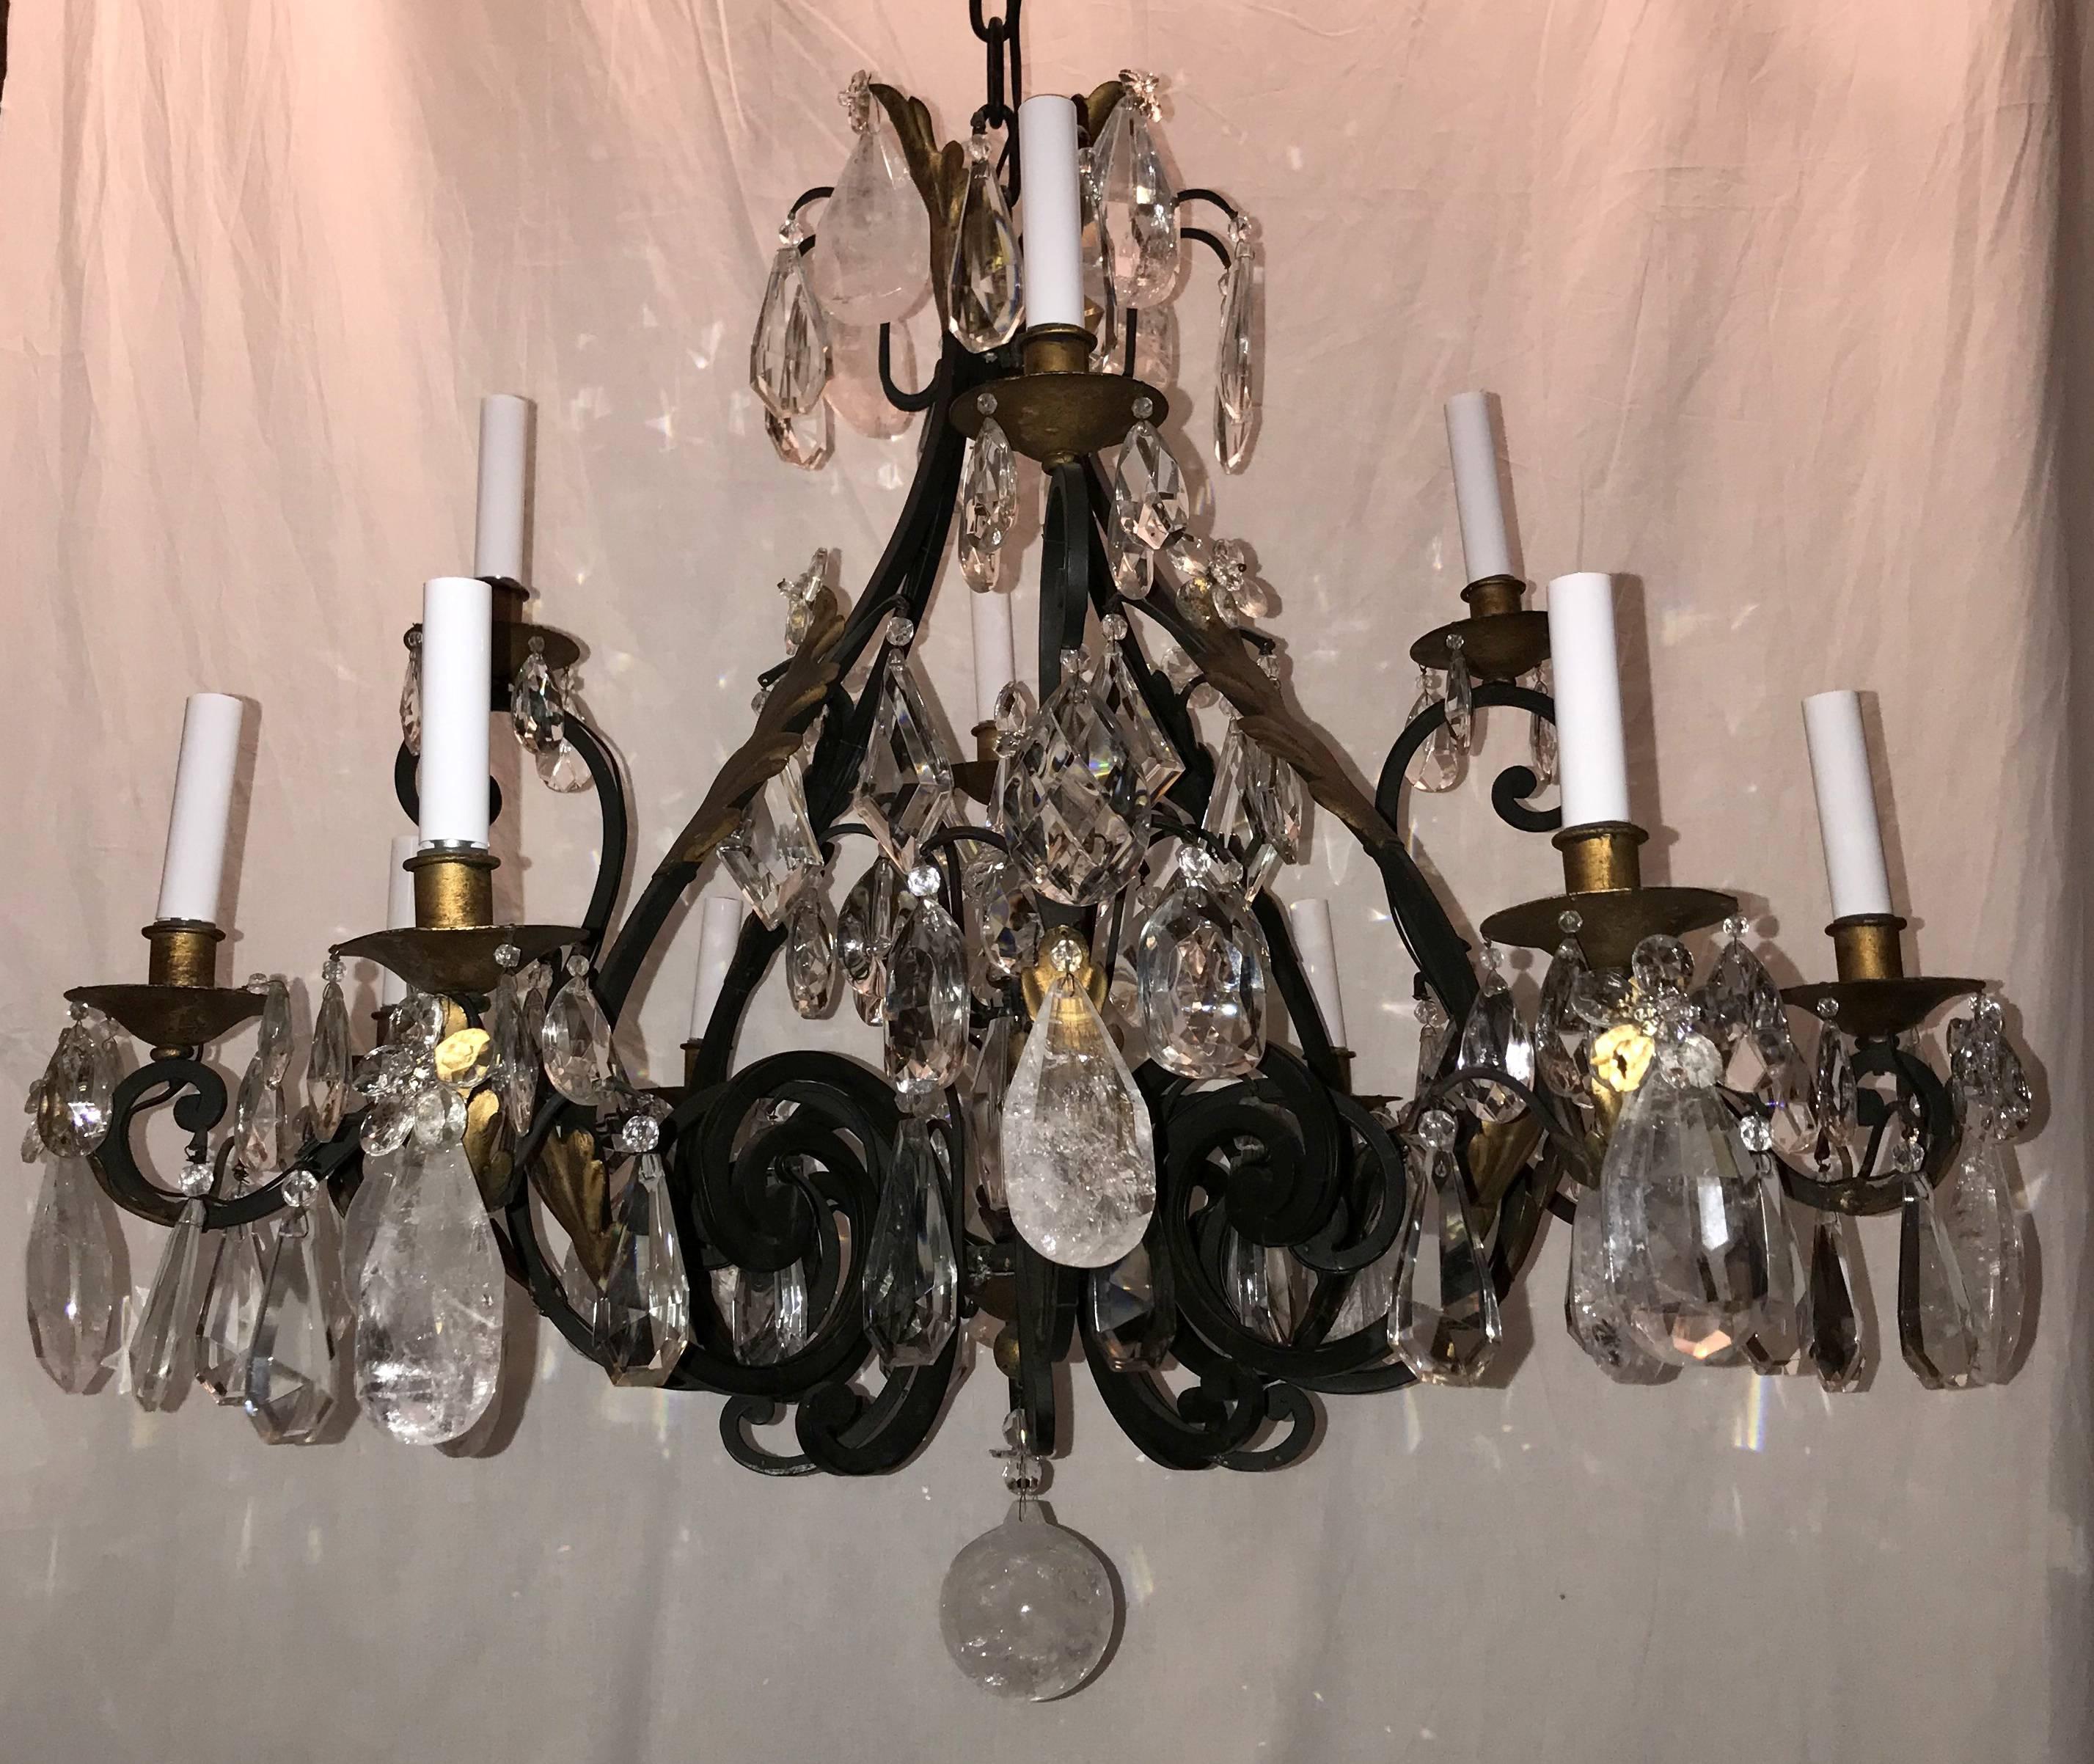 A wonderful large Maison Baguès style Louis XV French iron and gilt rock crystal and alternating faceted crystal chandelier adorned with flower crystals throughout and finished in the center with a beautiful crystal obelisk spike. Consisting of 12